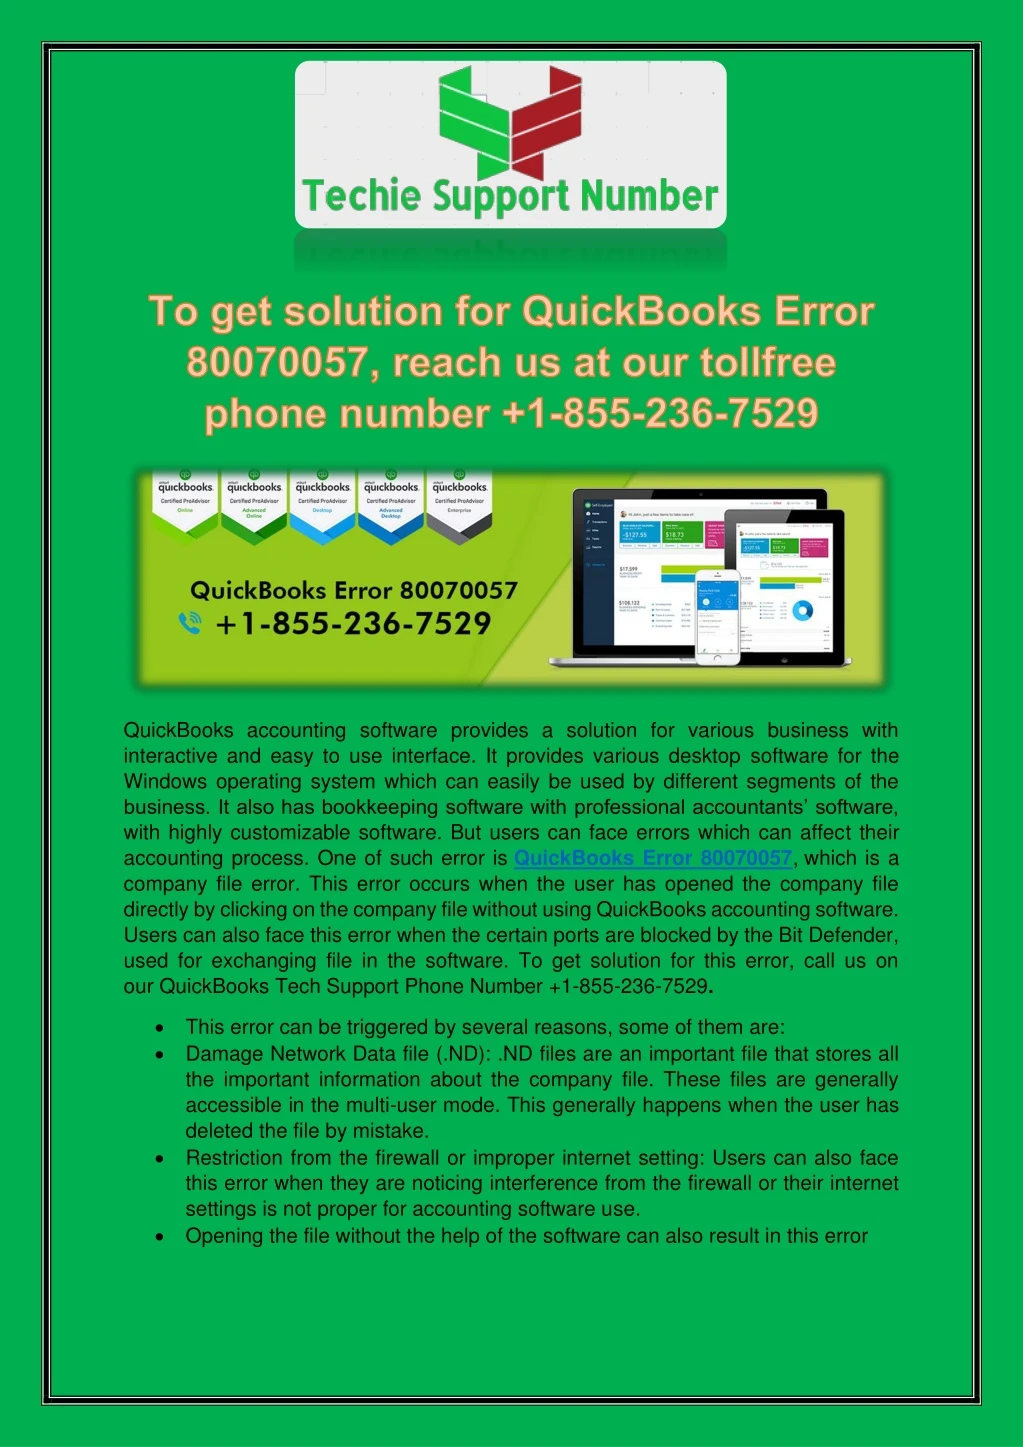 quickbooks accounting software provides